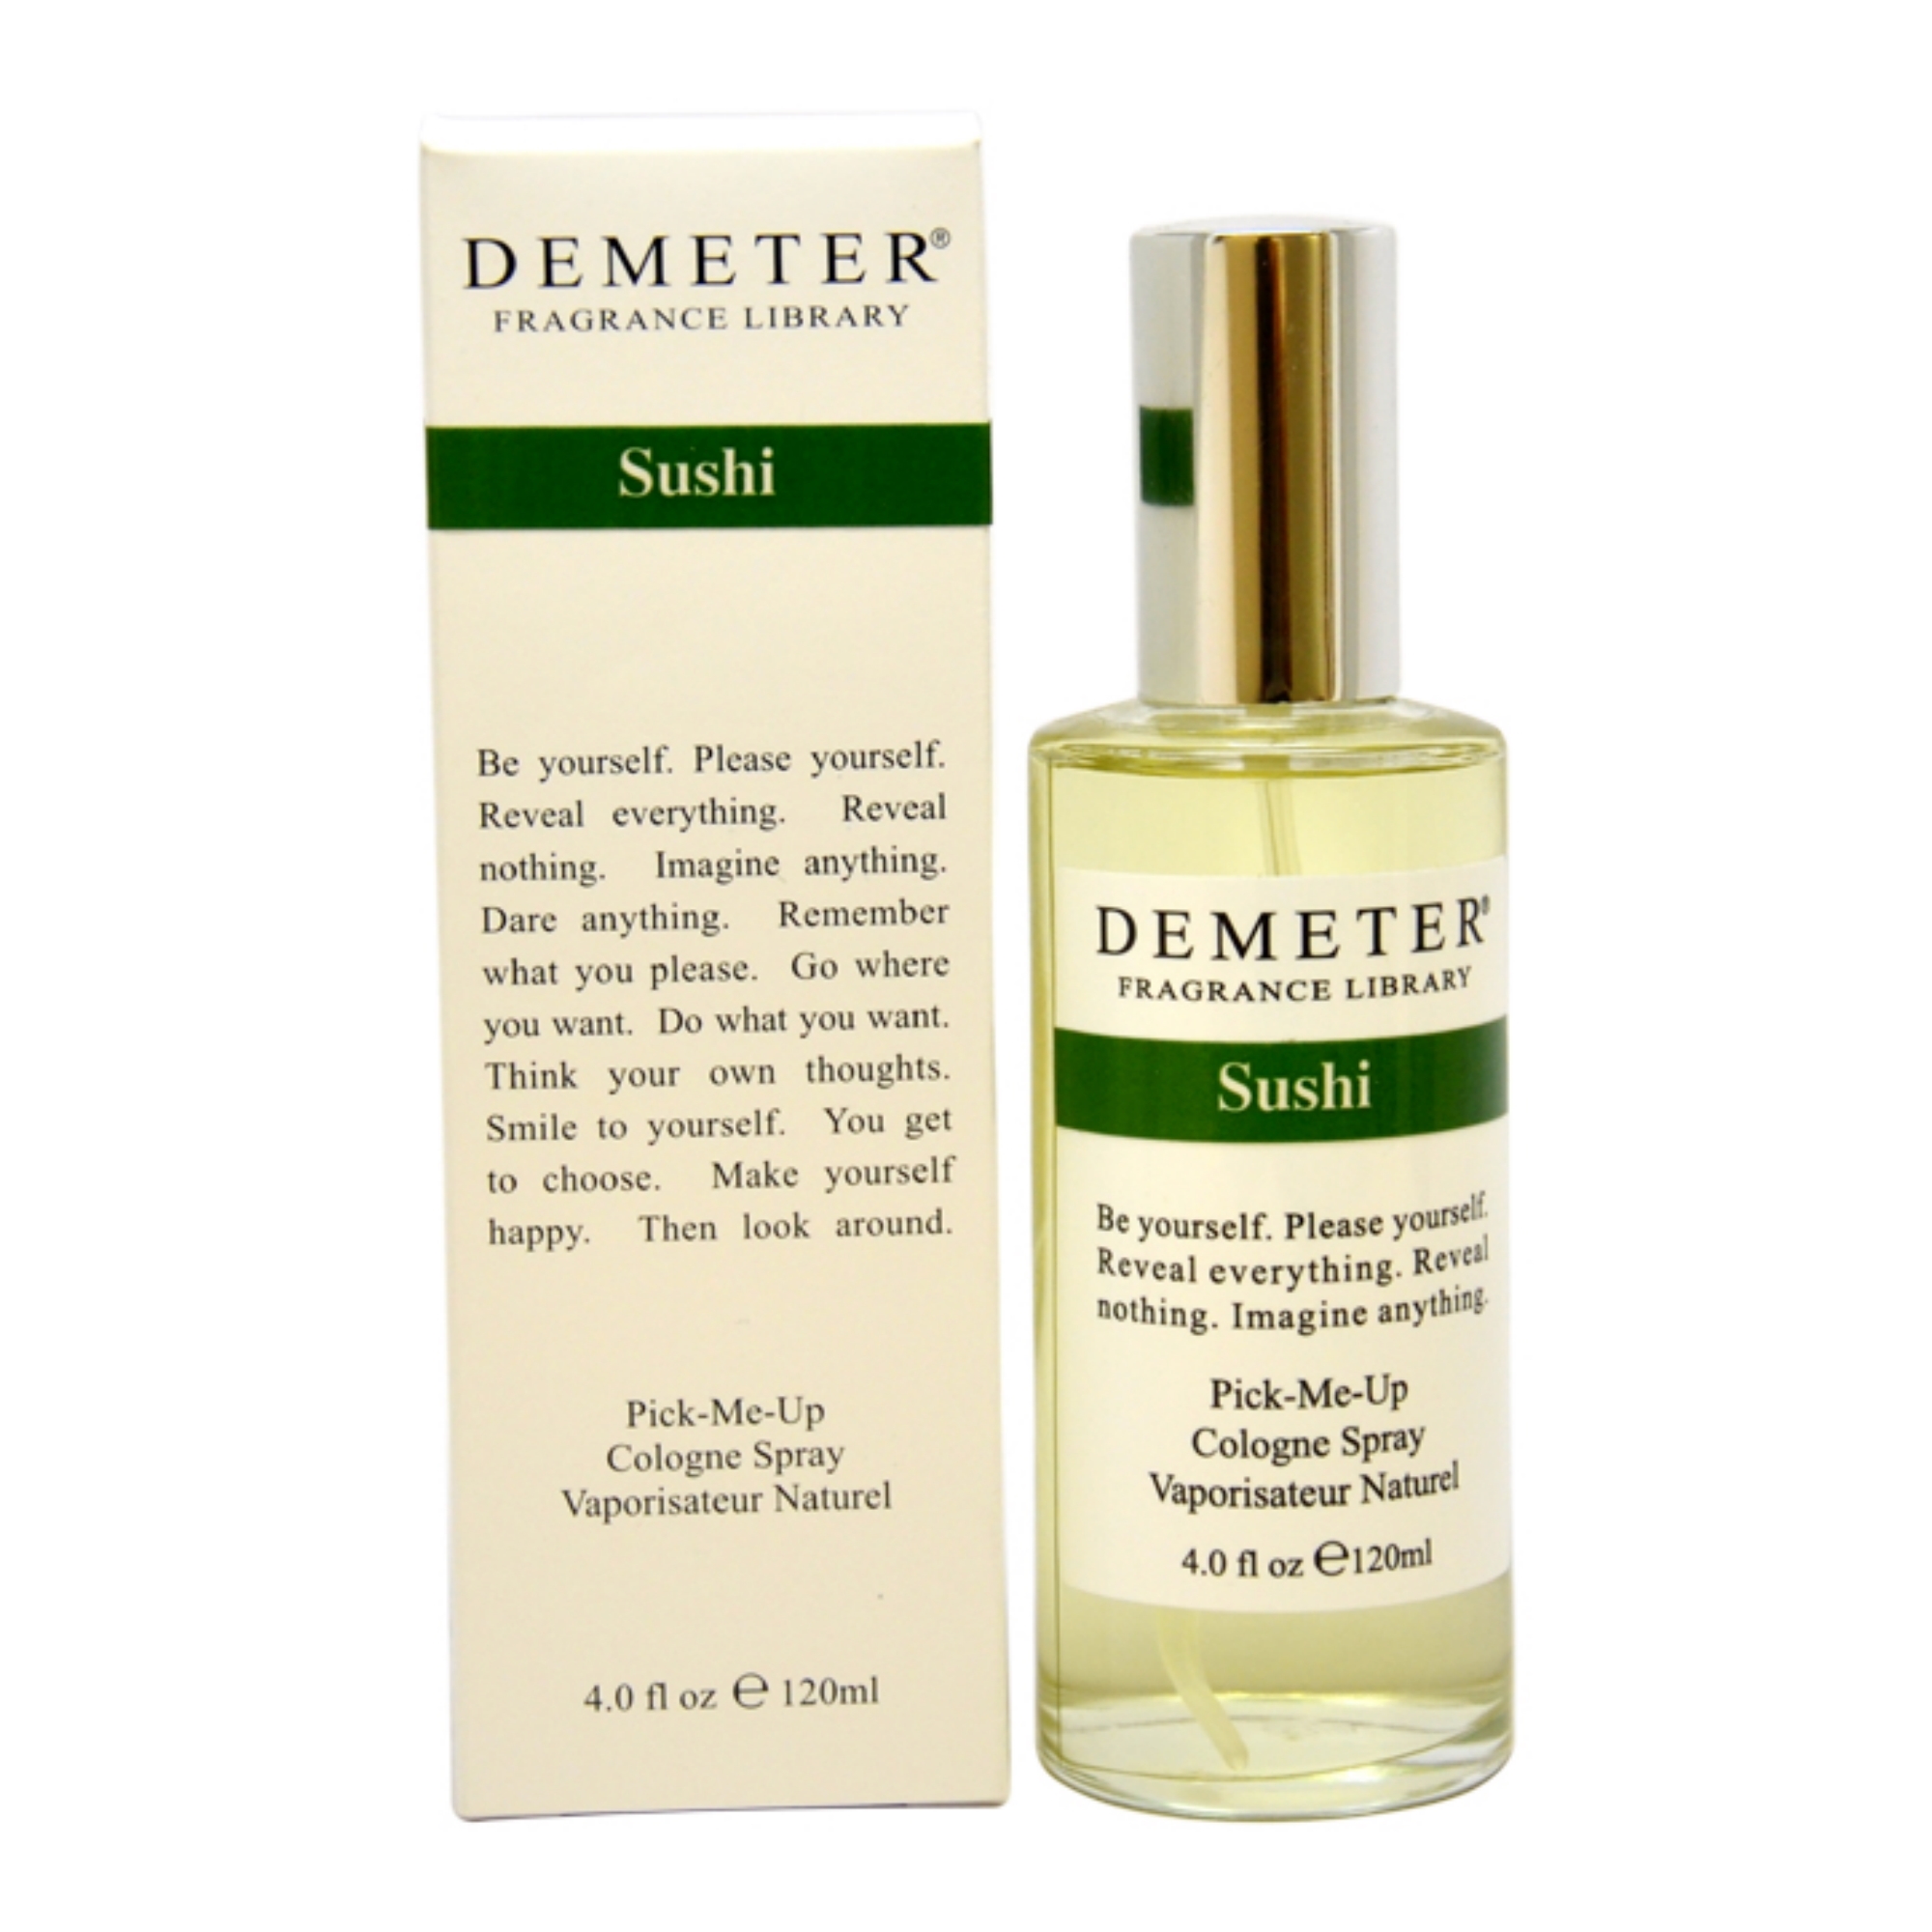 Sushi by Demeter for Women - 4 oz Cologne Spray